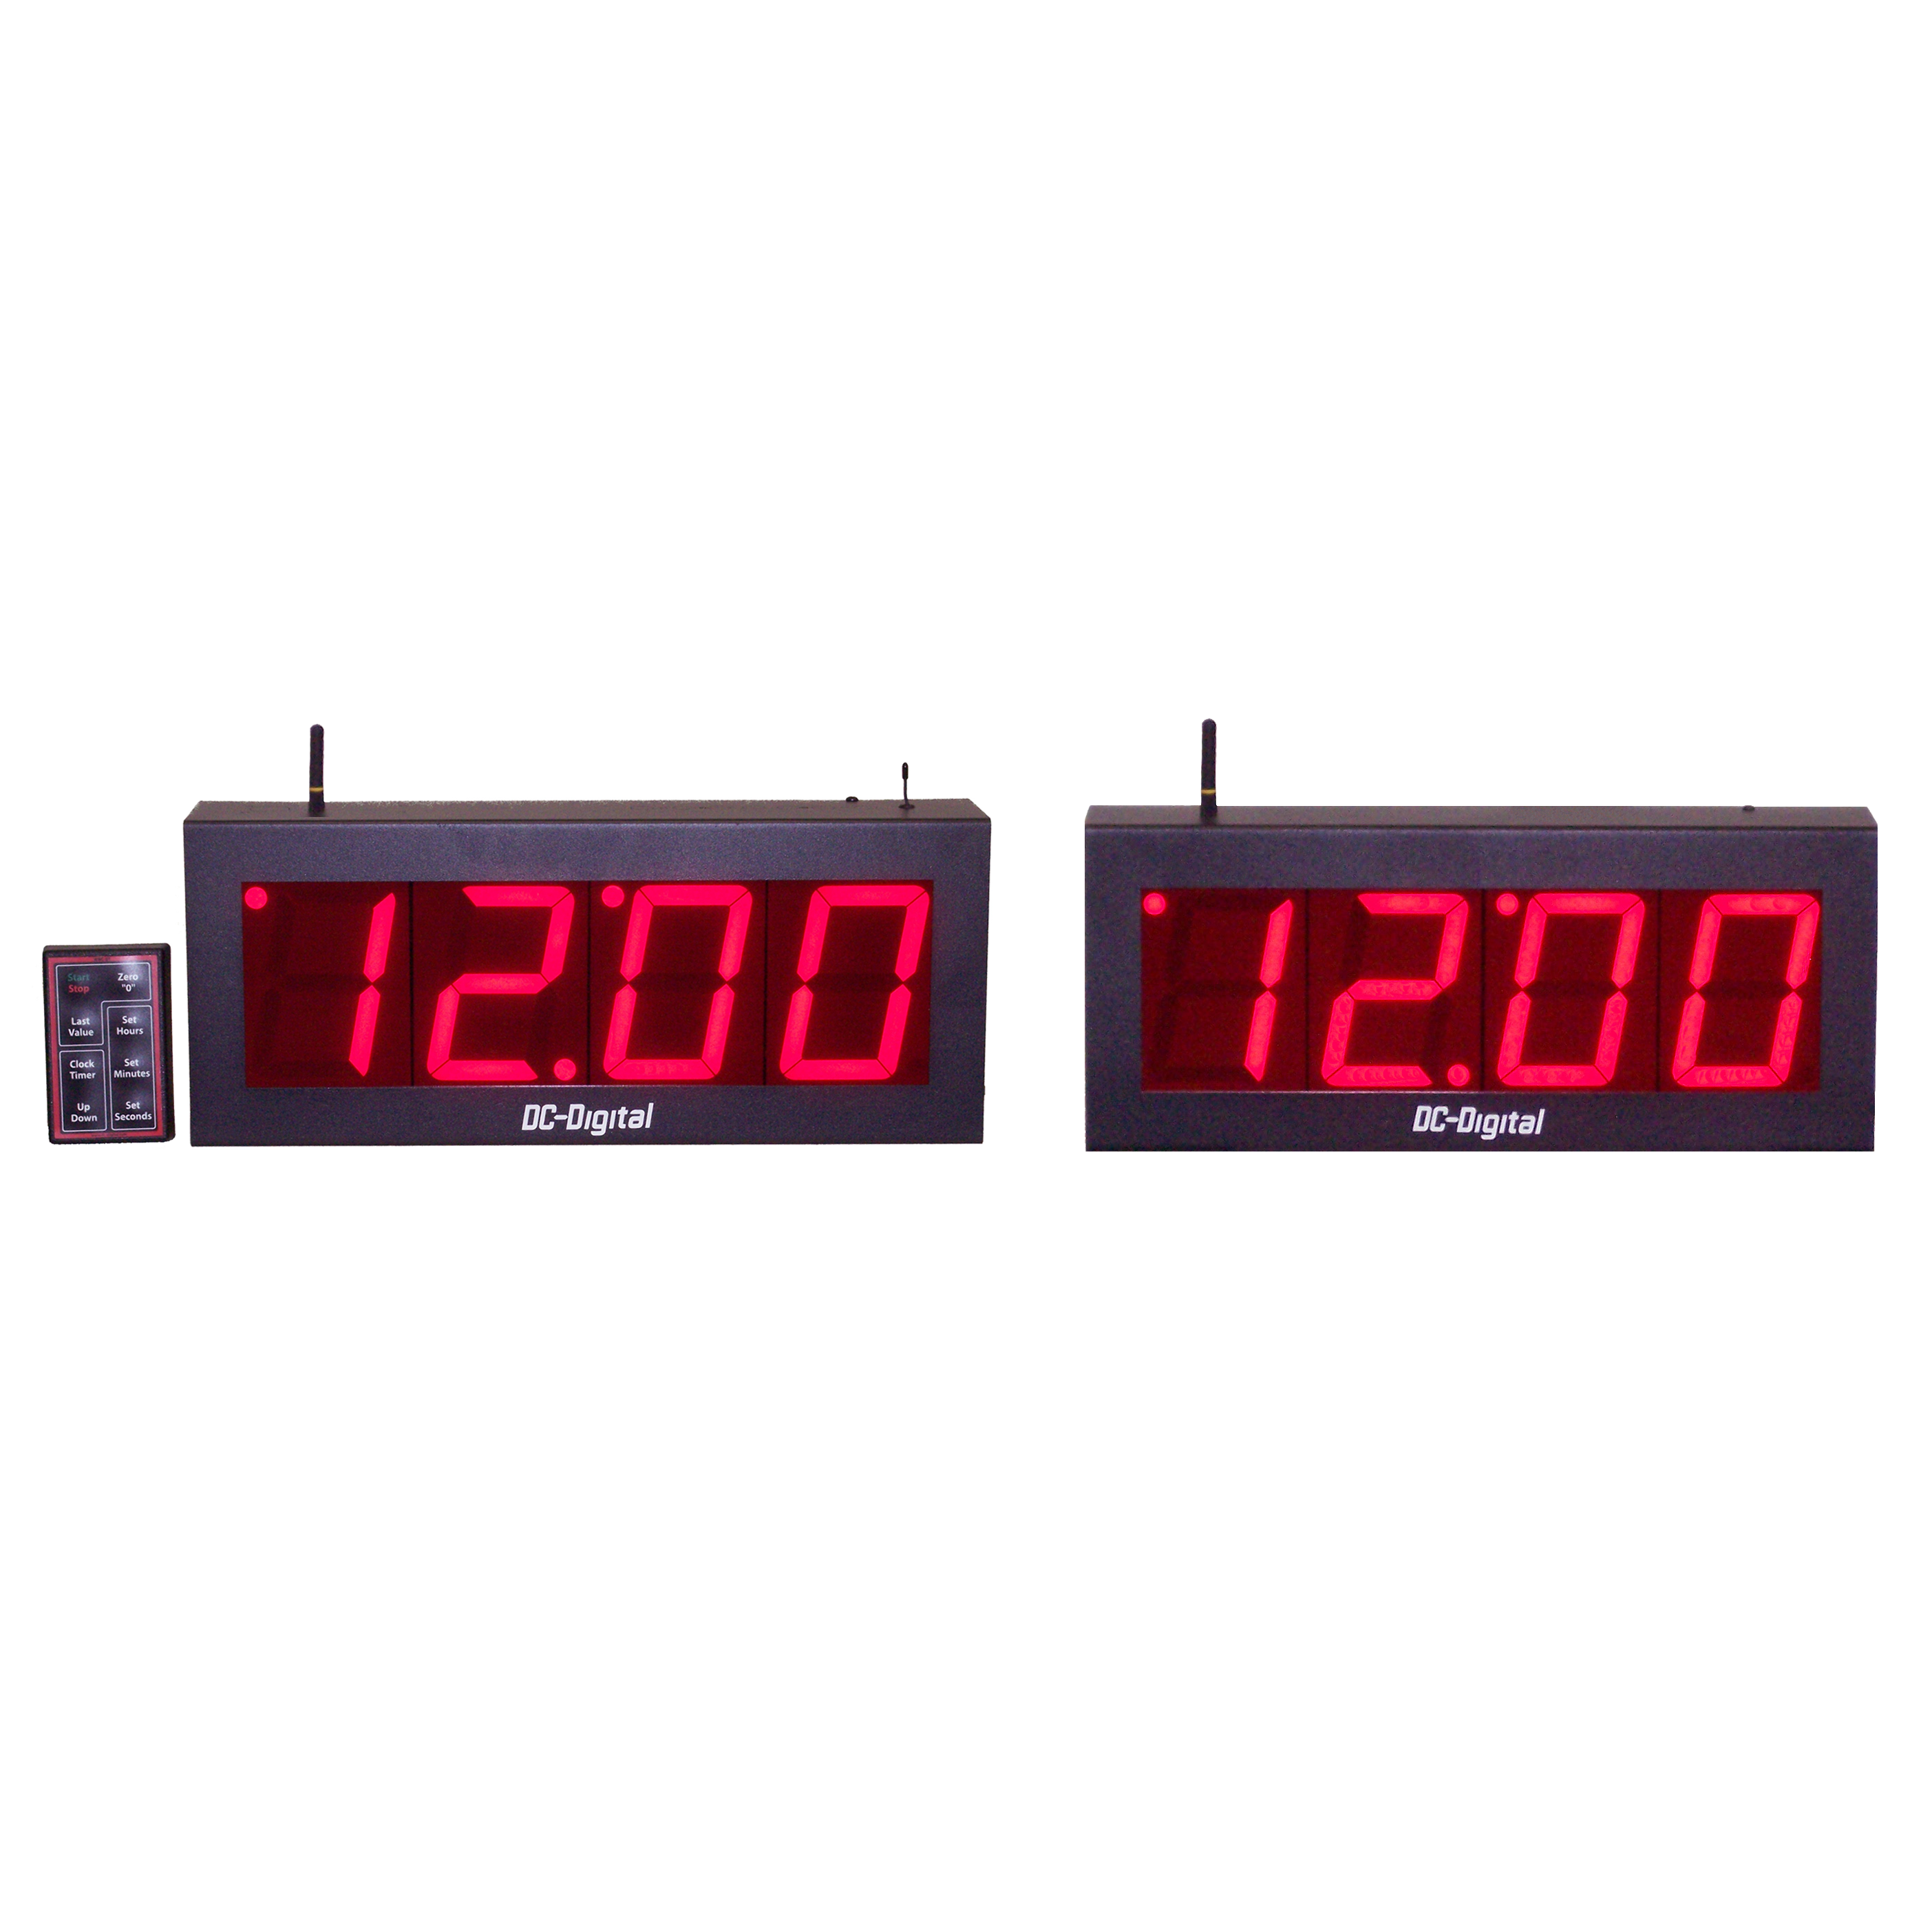 (DC-40UTW-SYSTEM-W) 4 Inch LED, Multi-Function Master-Secondary Wireless Controlled Synchronized Timer System